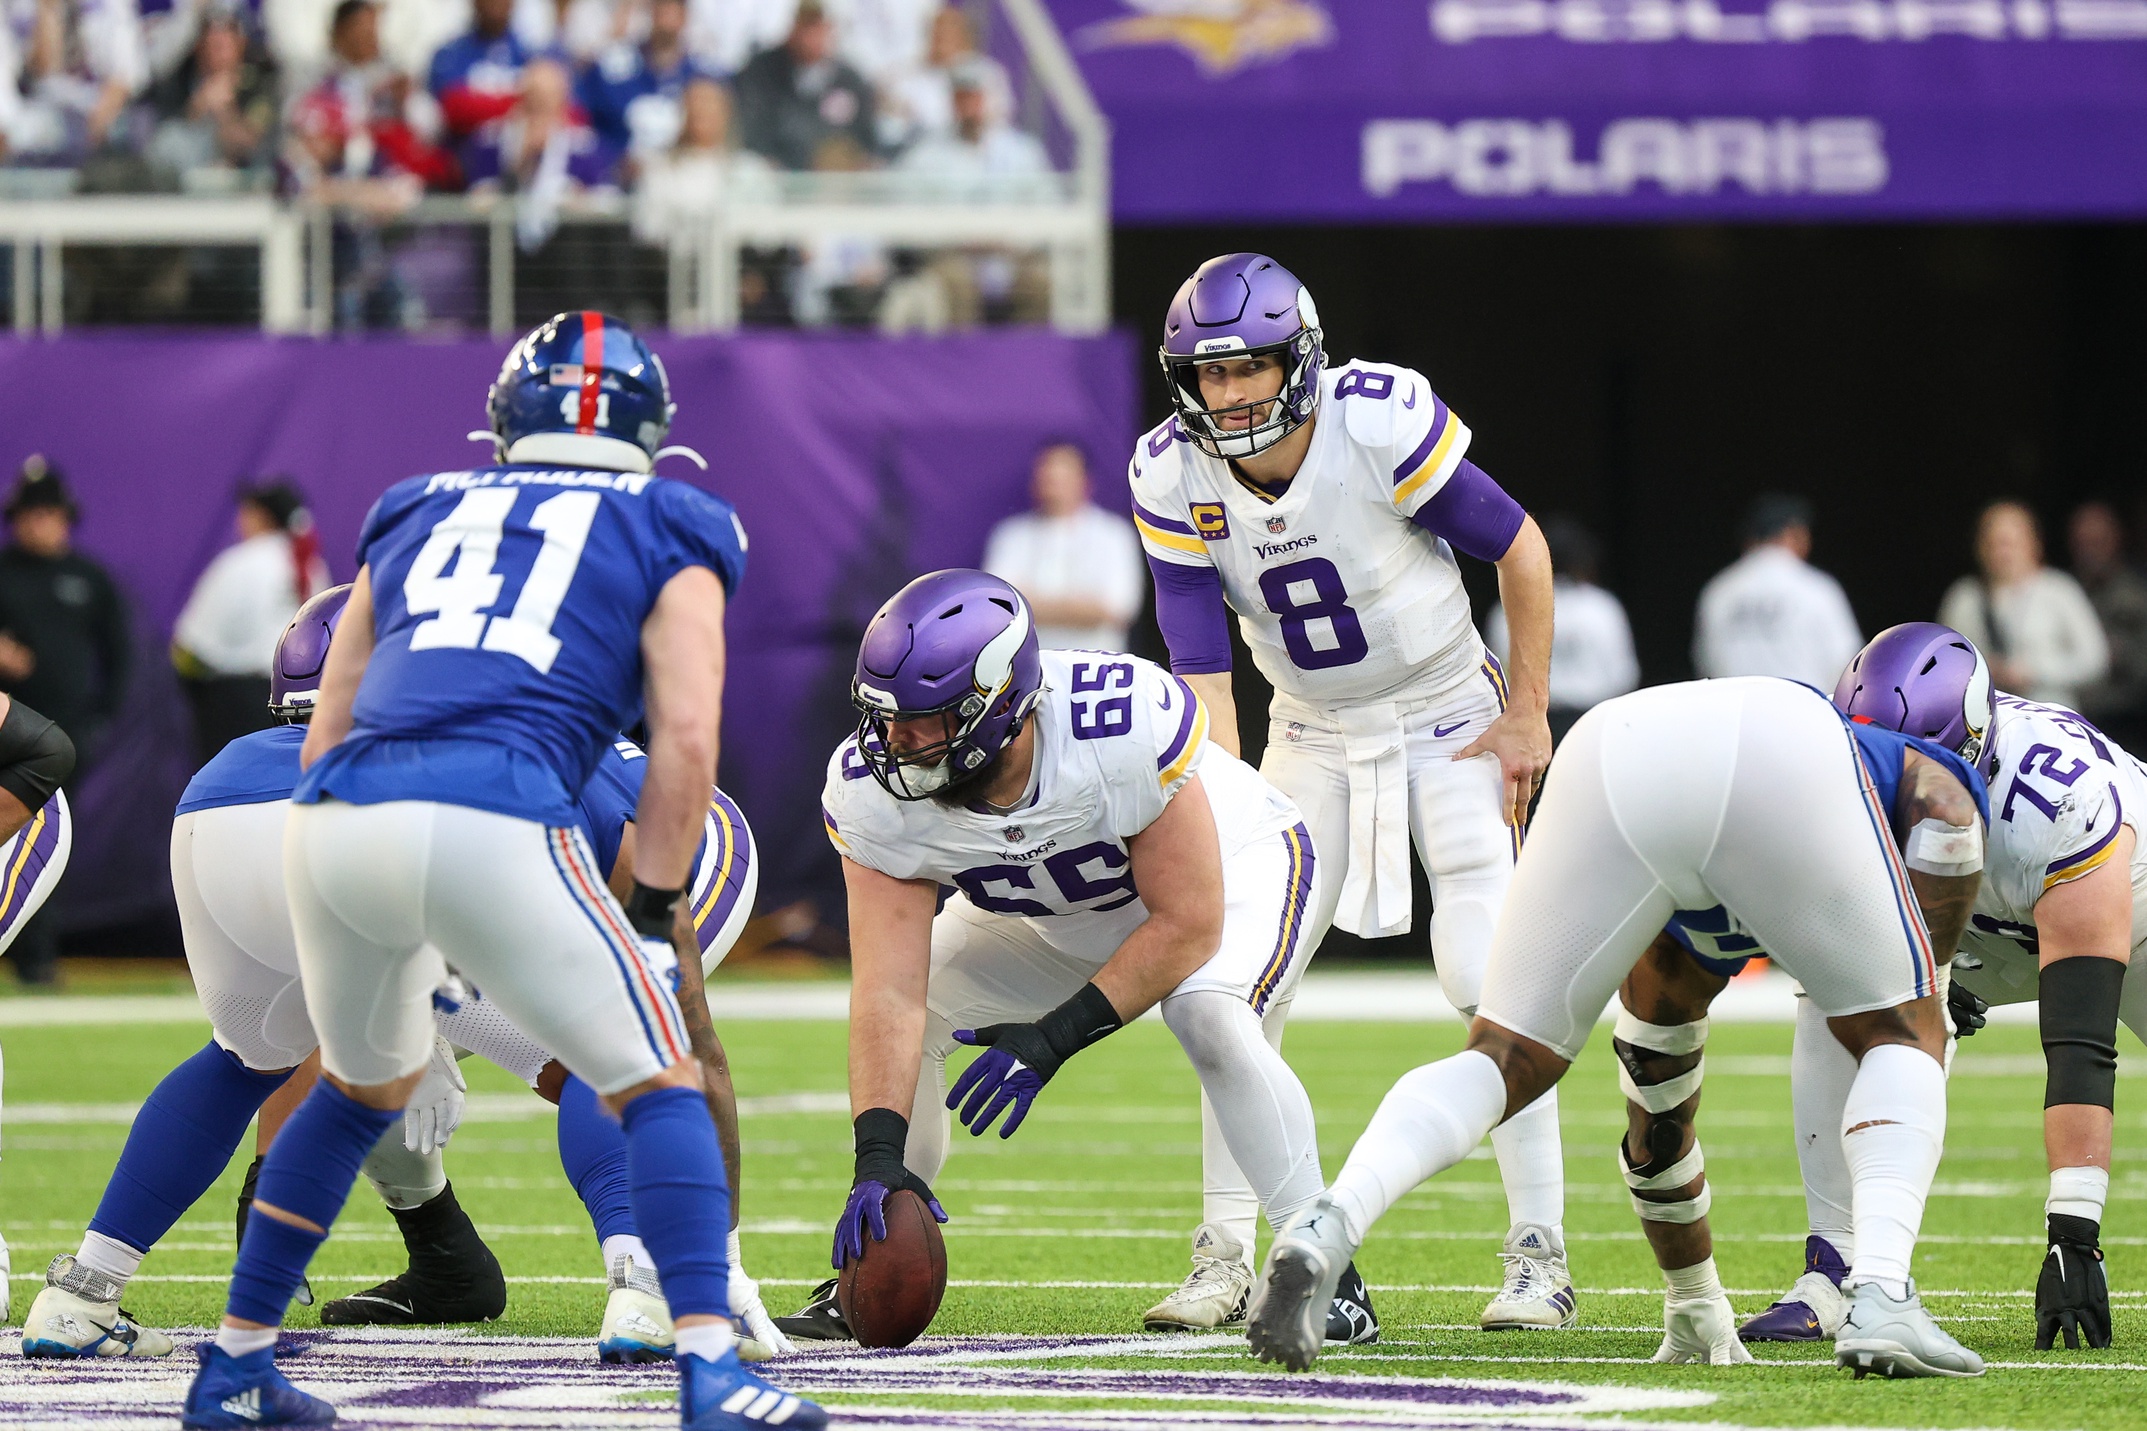 Playoff scenarios: Vikings will face Giants, Packers, Seahawks or Lions